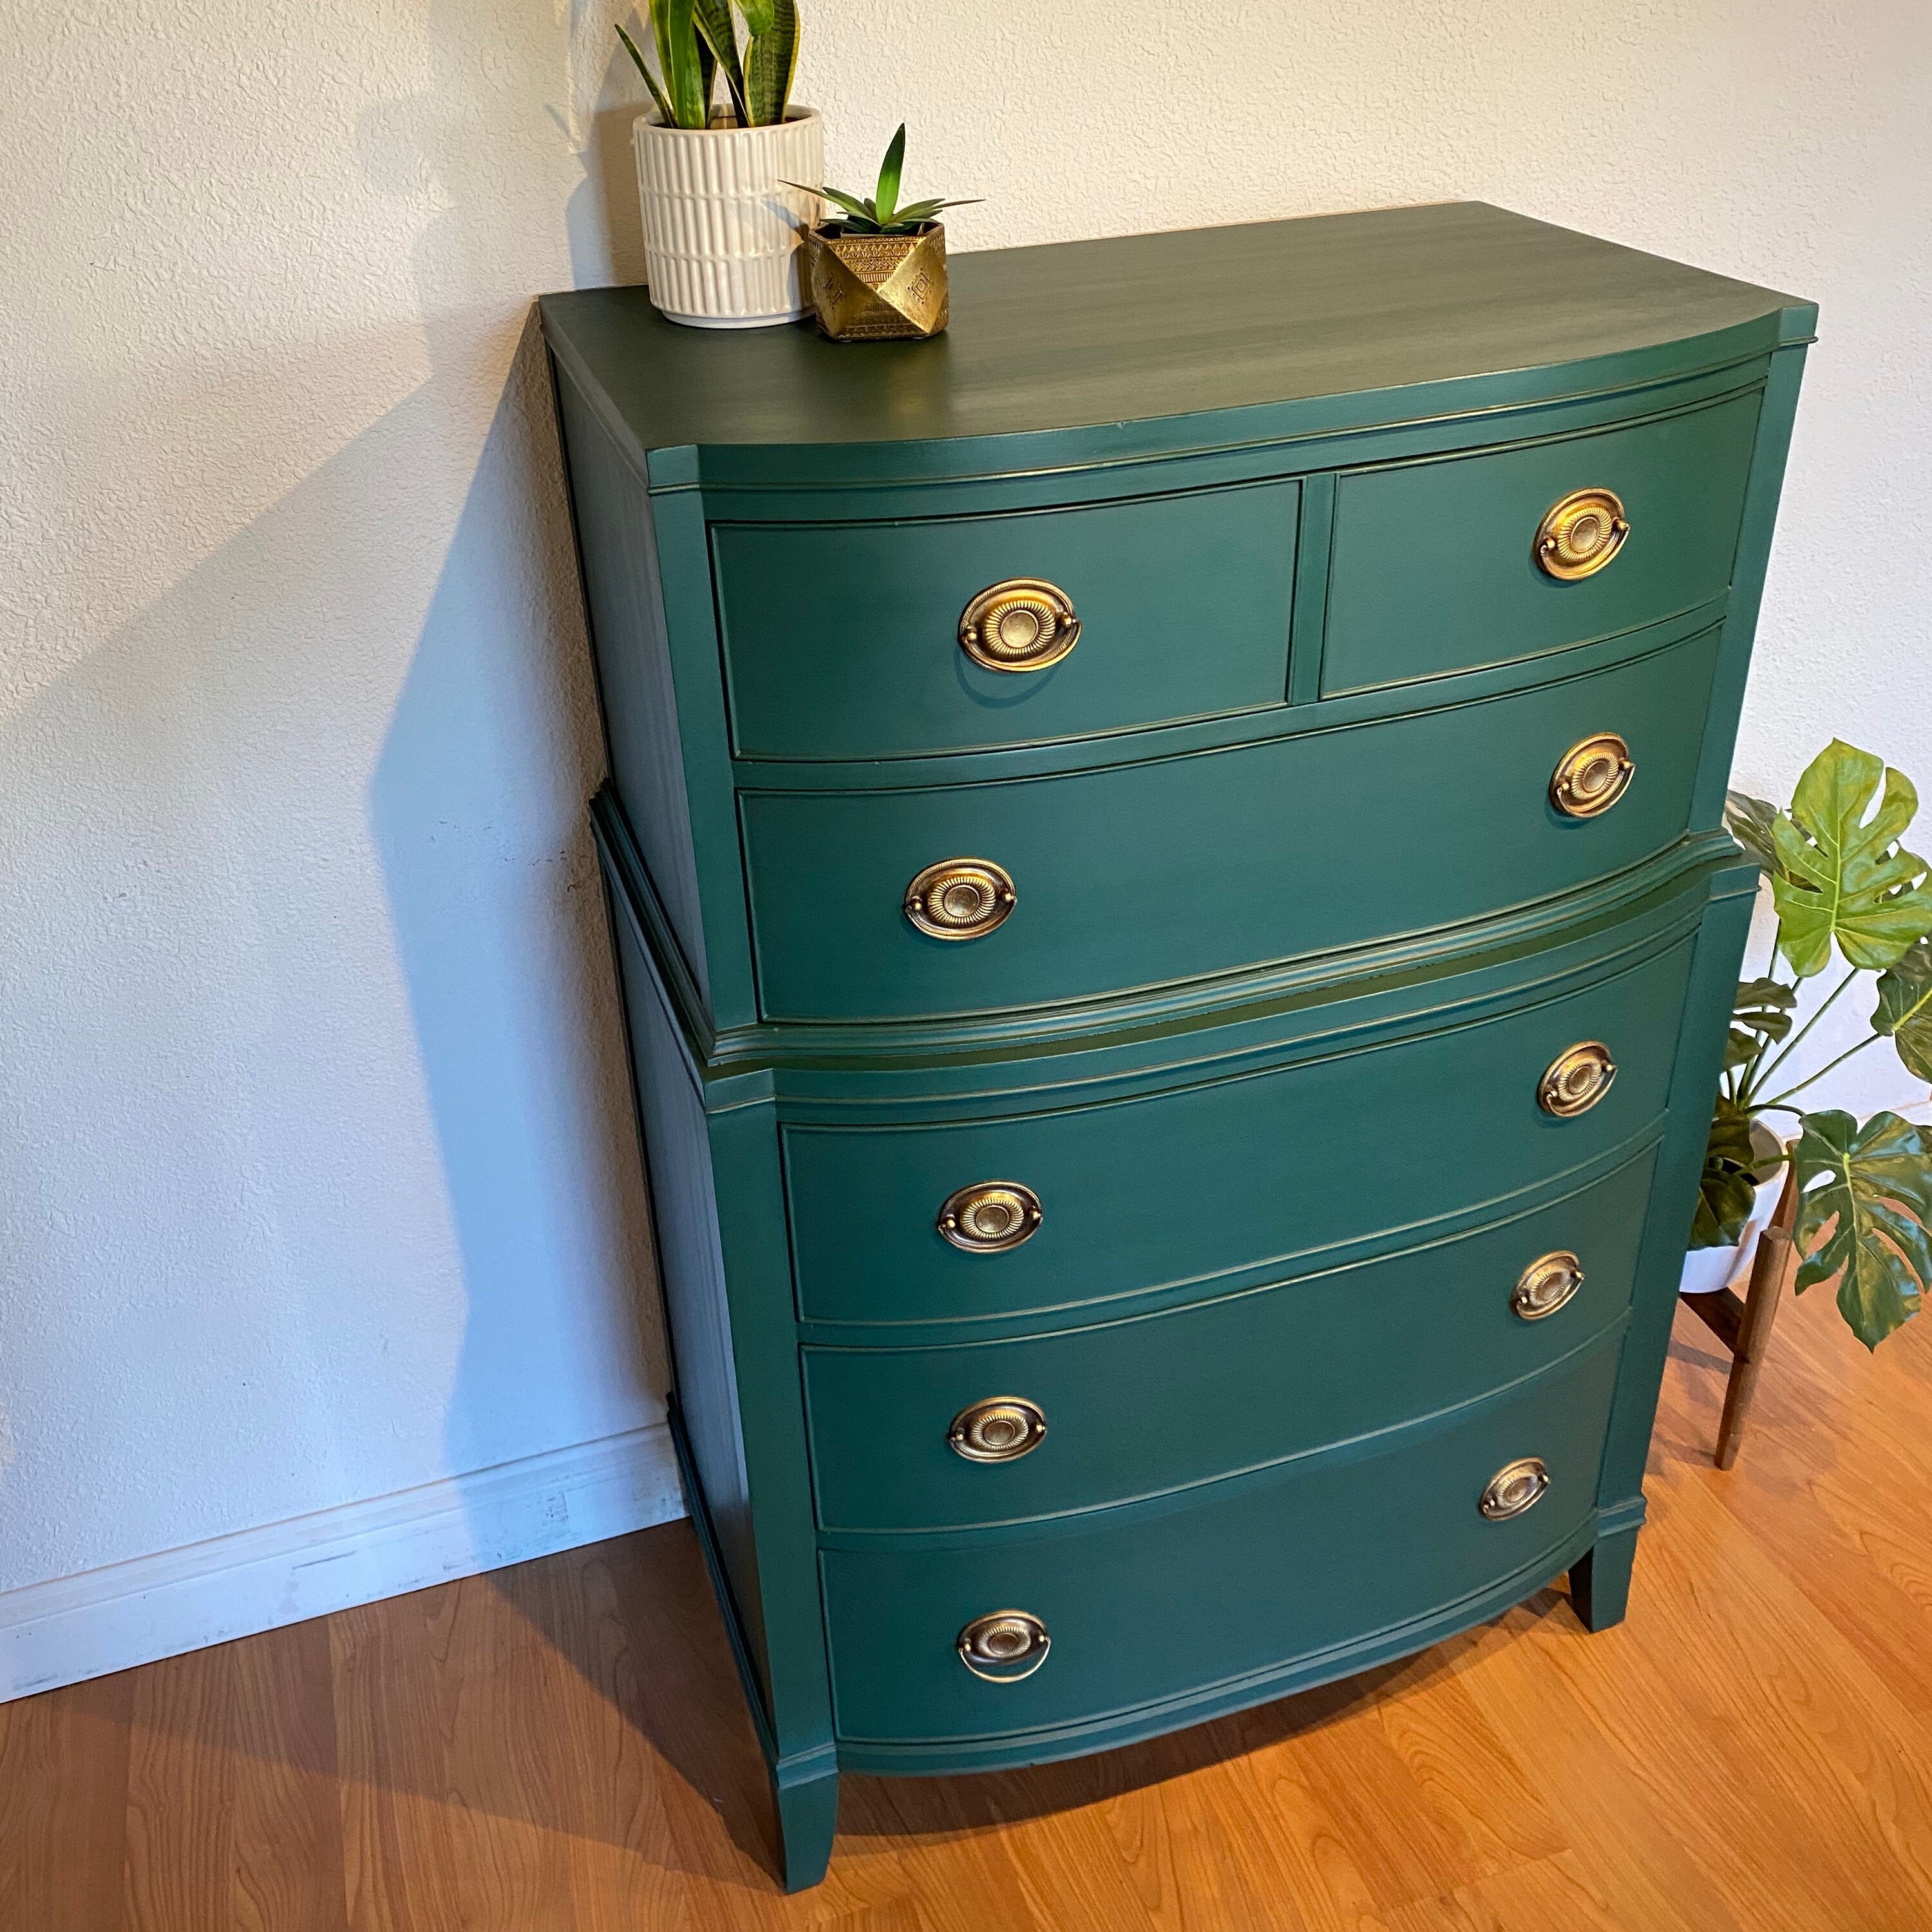 SOLD Tall Antique Emerald Green Dresser Chest of Drawers Narrow